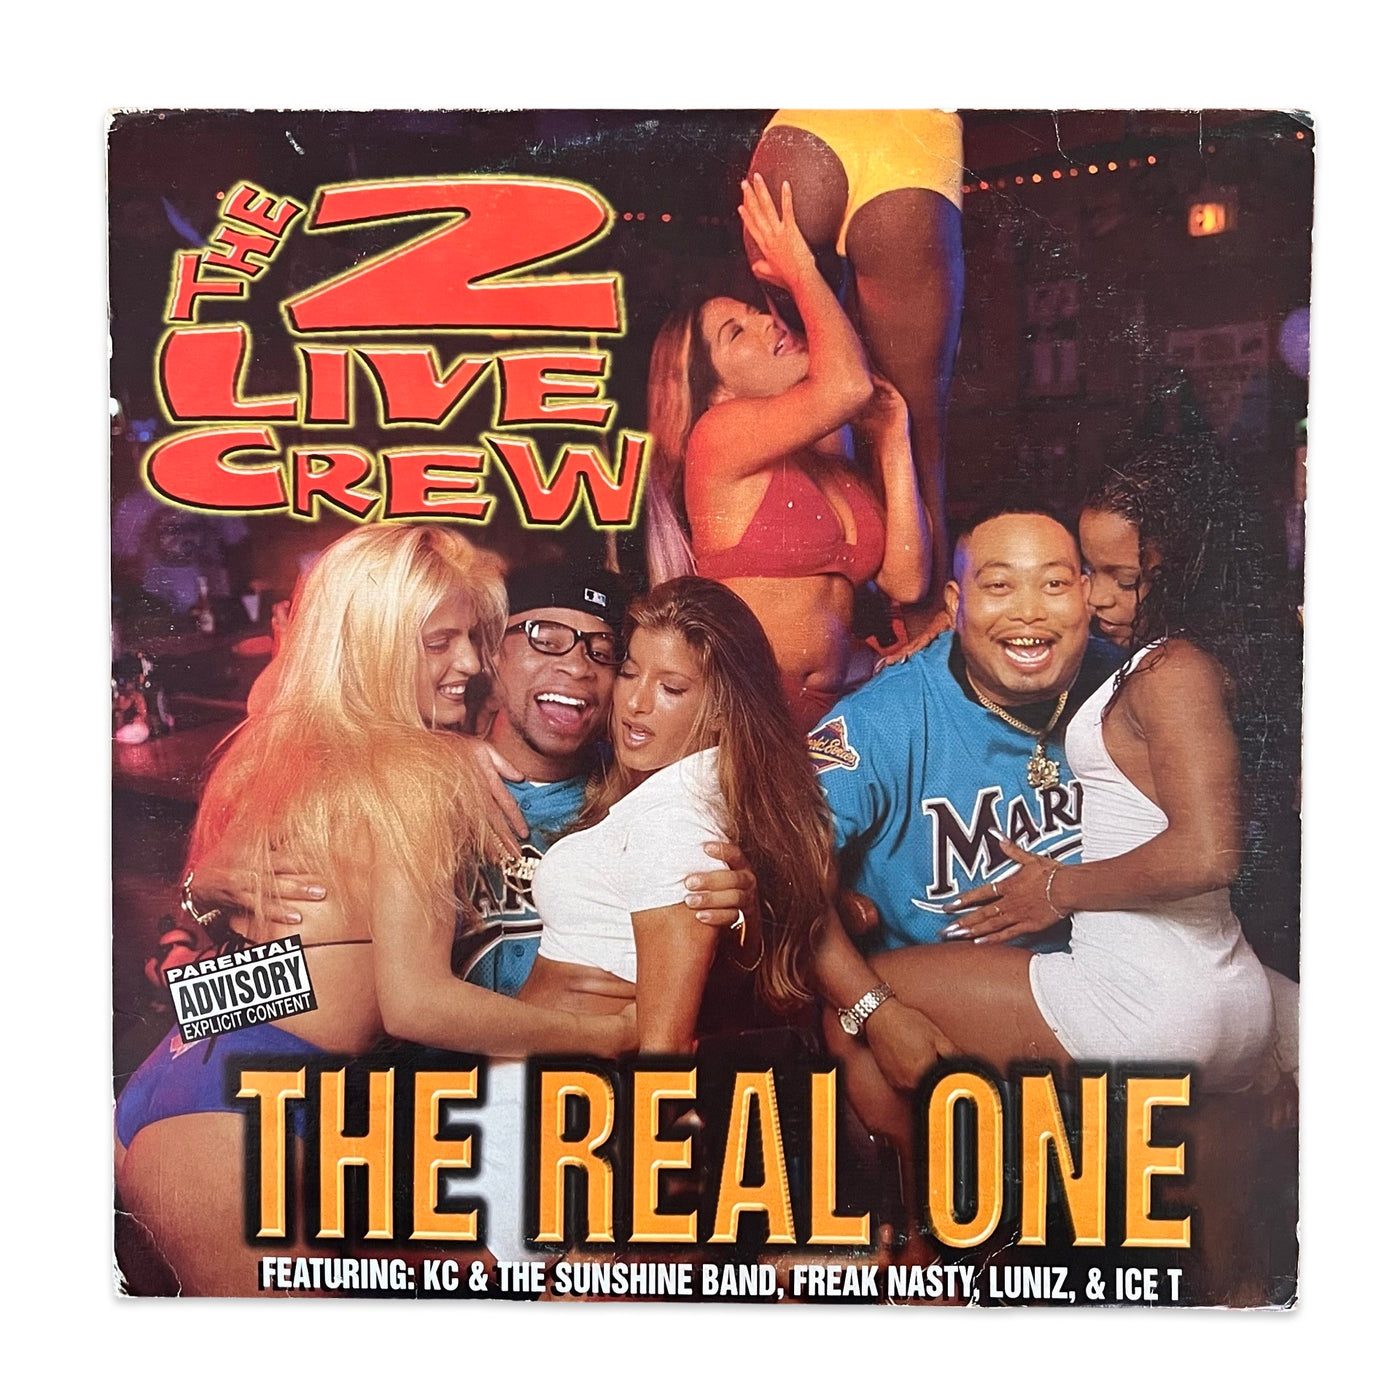 The 2 Live Crew – The Real One